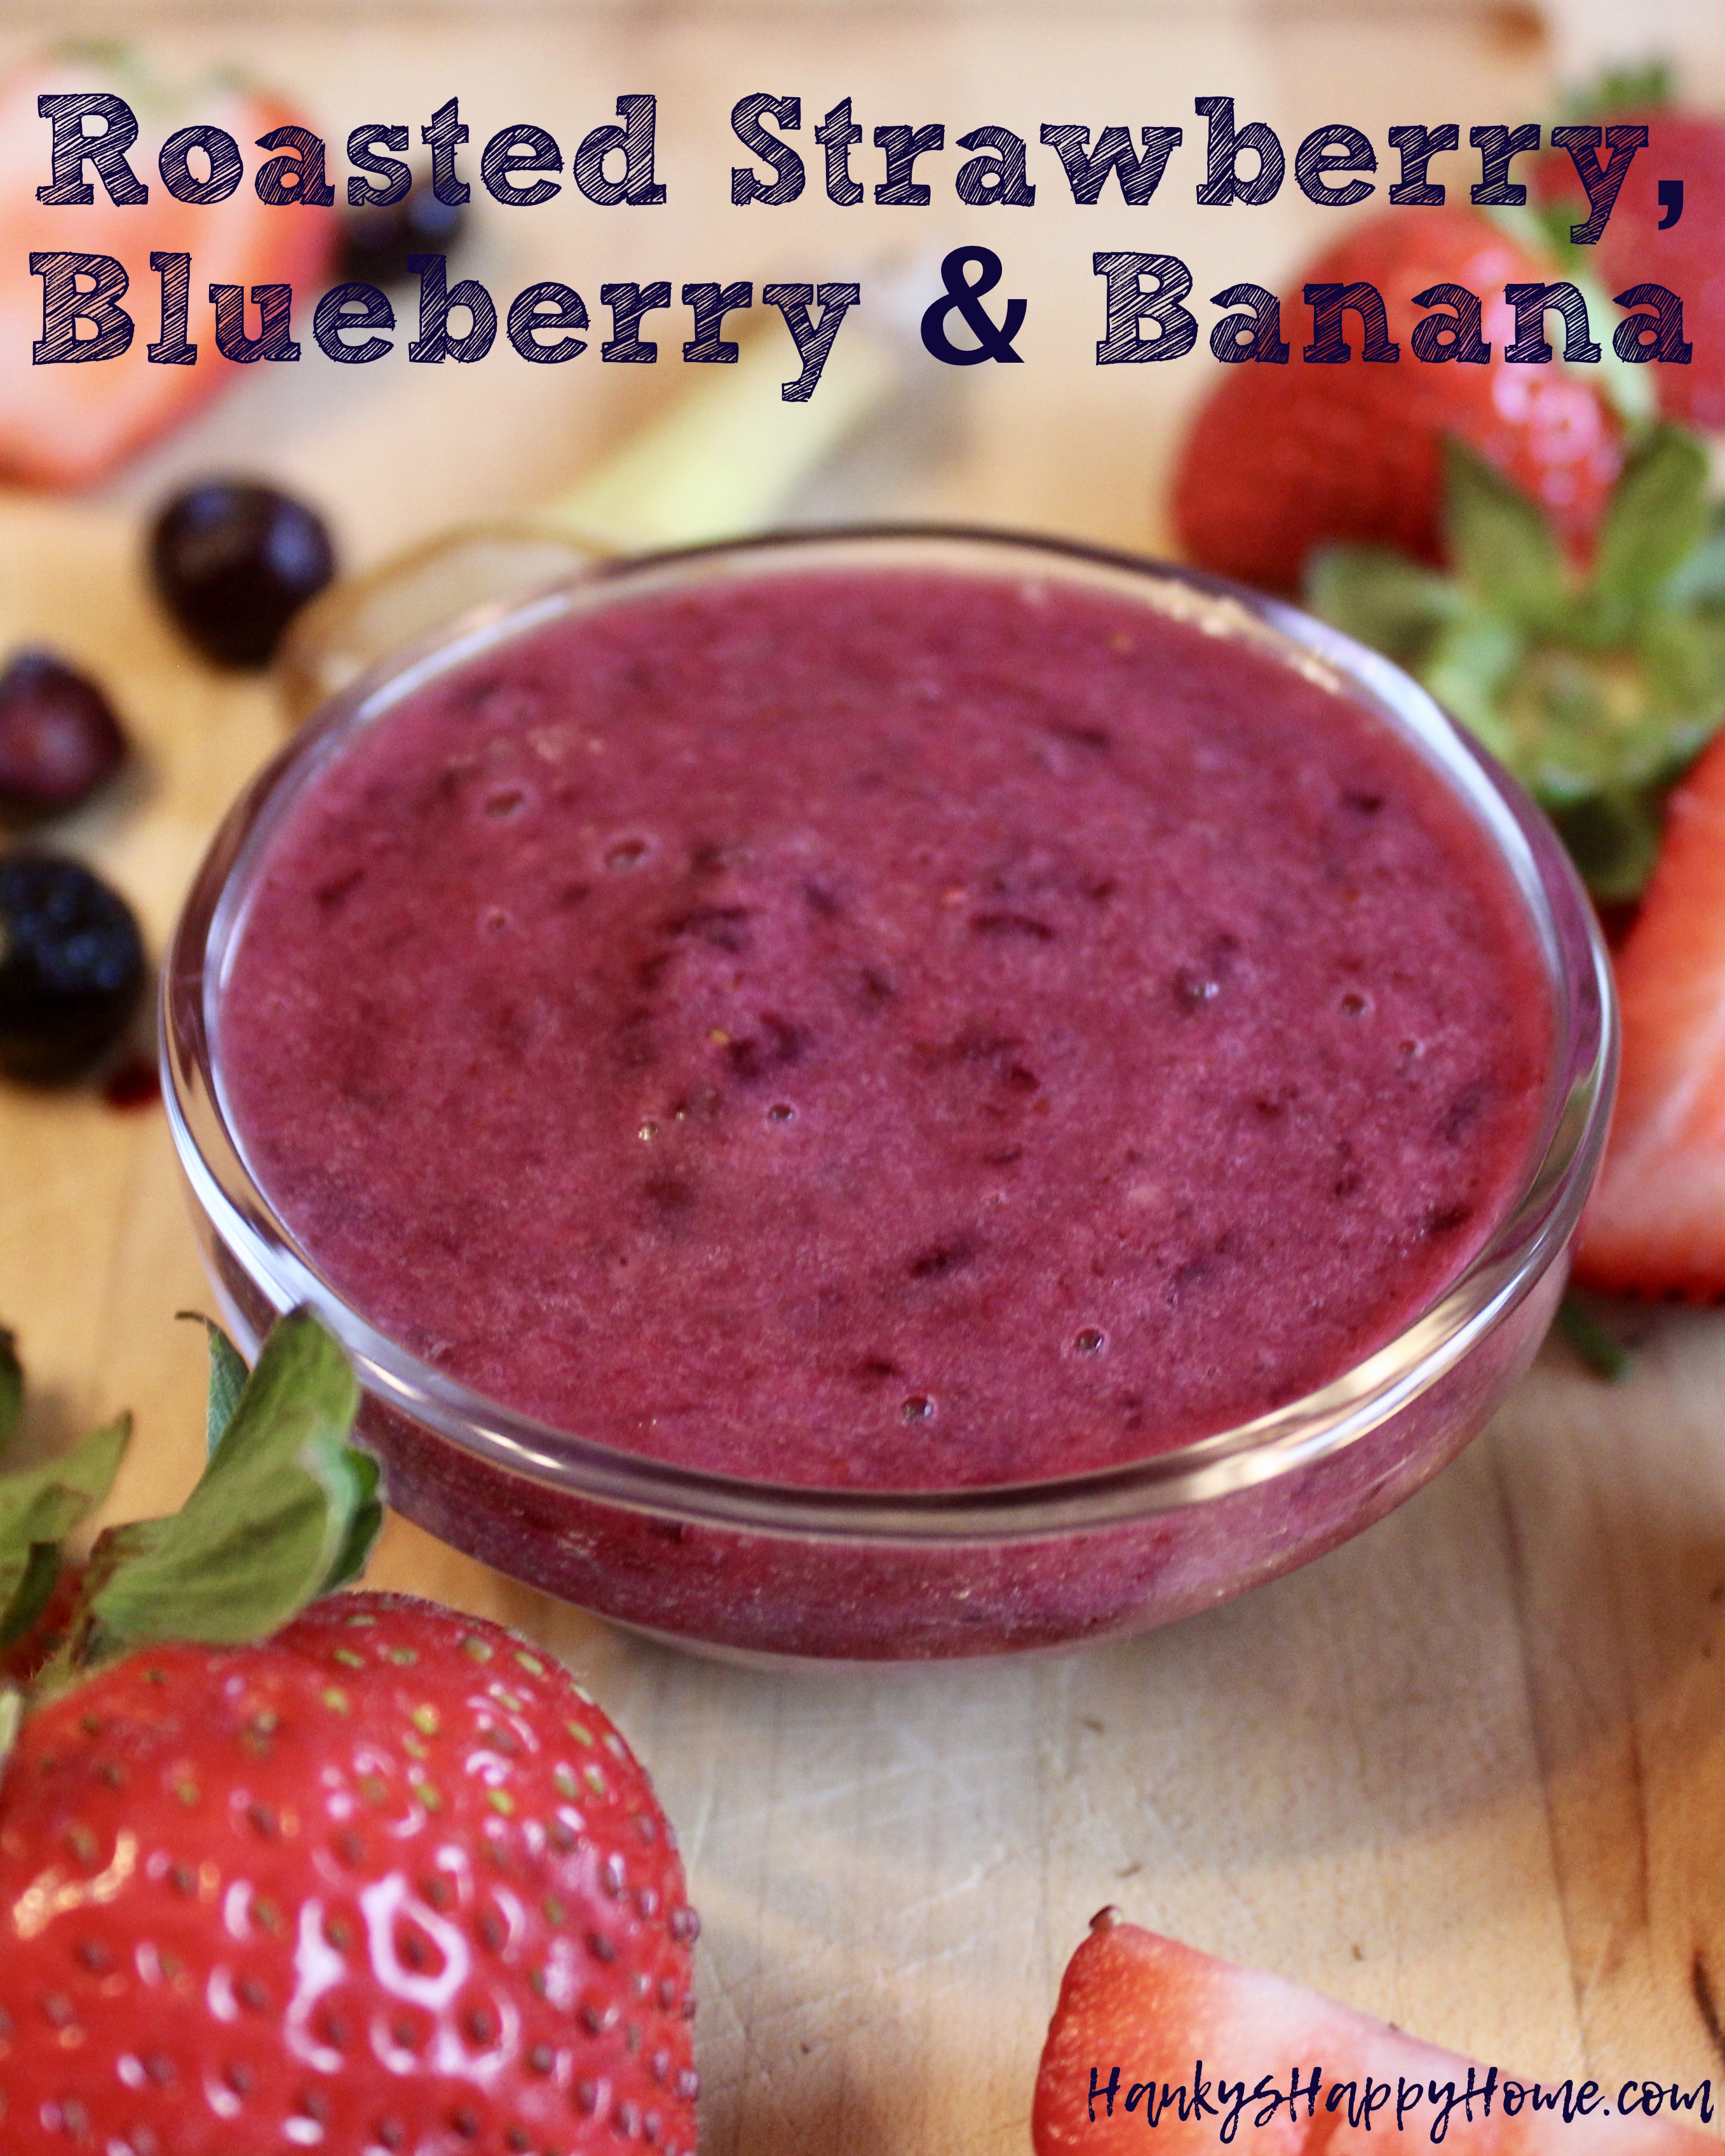 This Roasted Strawberry, Blueberry & Banana baby food is a colorful and yummy addition to any meal. Plus, it's packed with Vitamin C to boost the immune system.